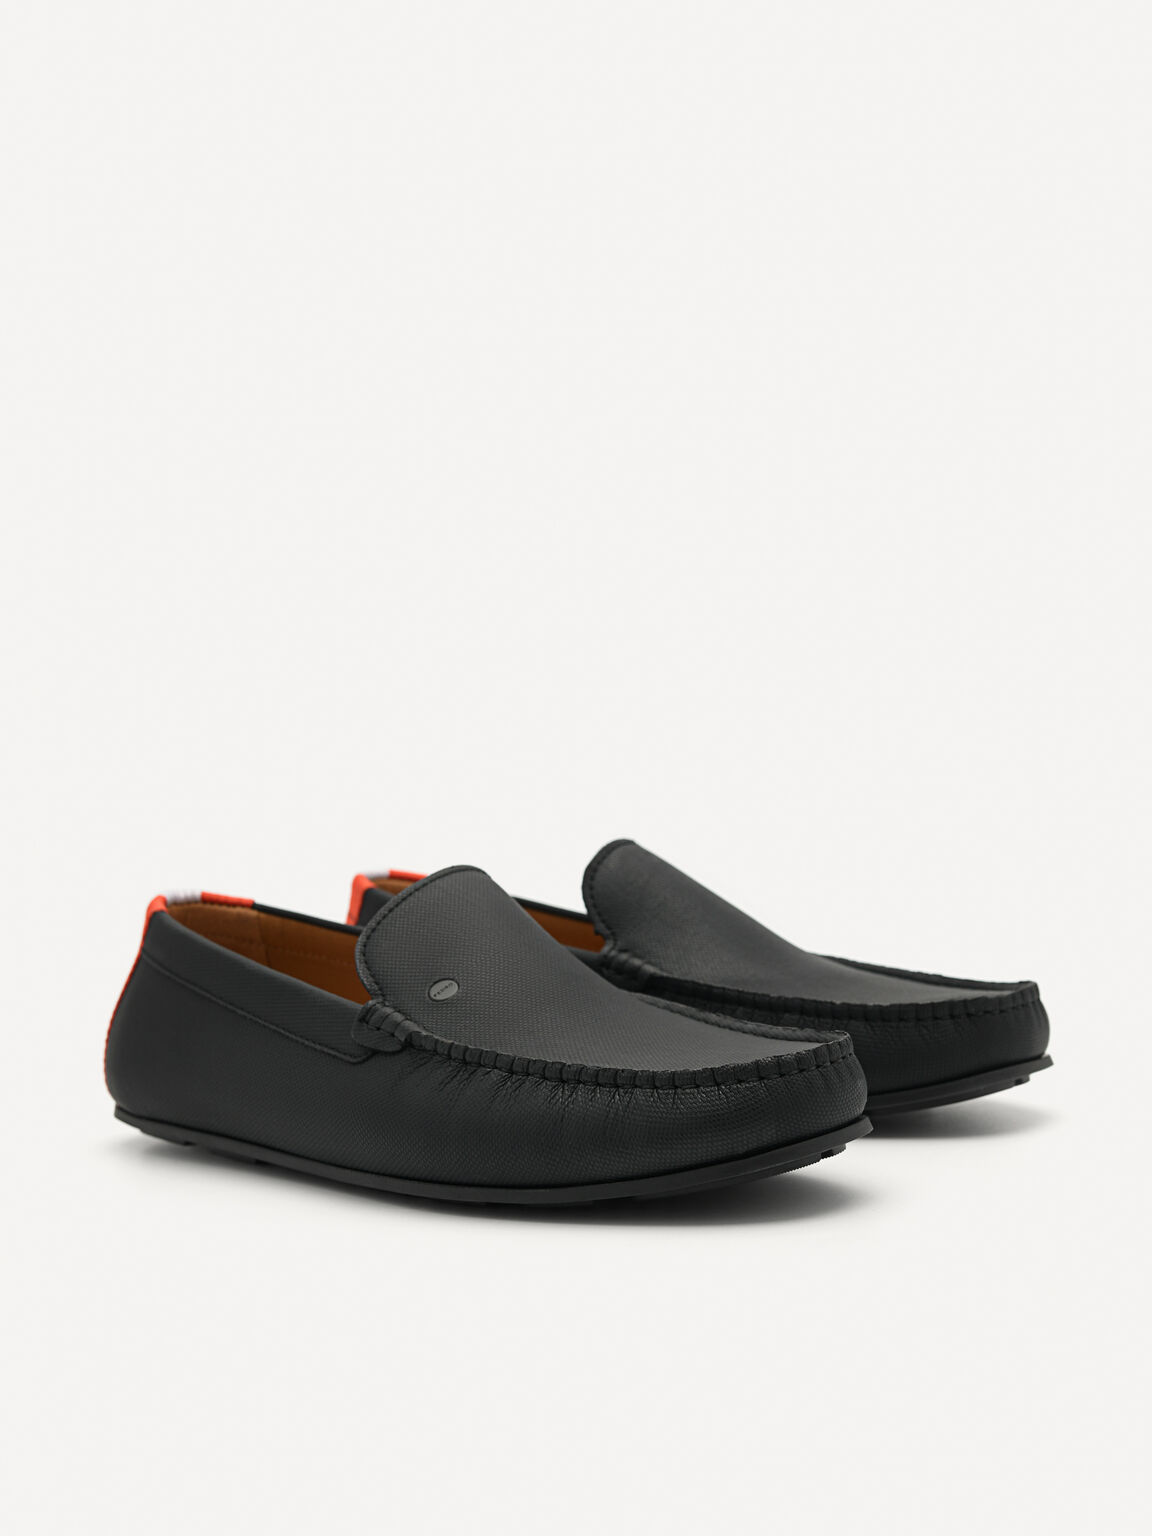 Leather & Fabric Slip-On Driving Shoes, Black, hi-res